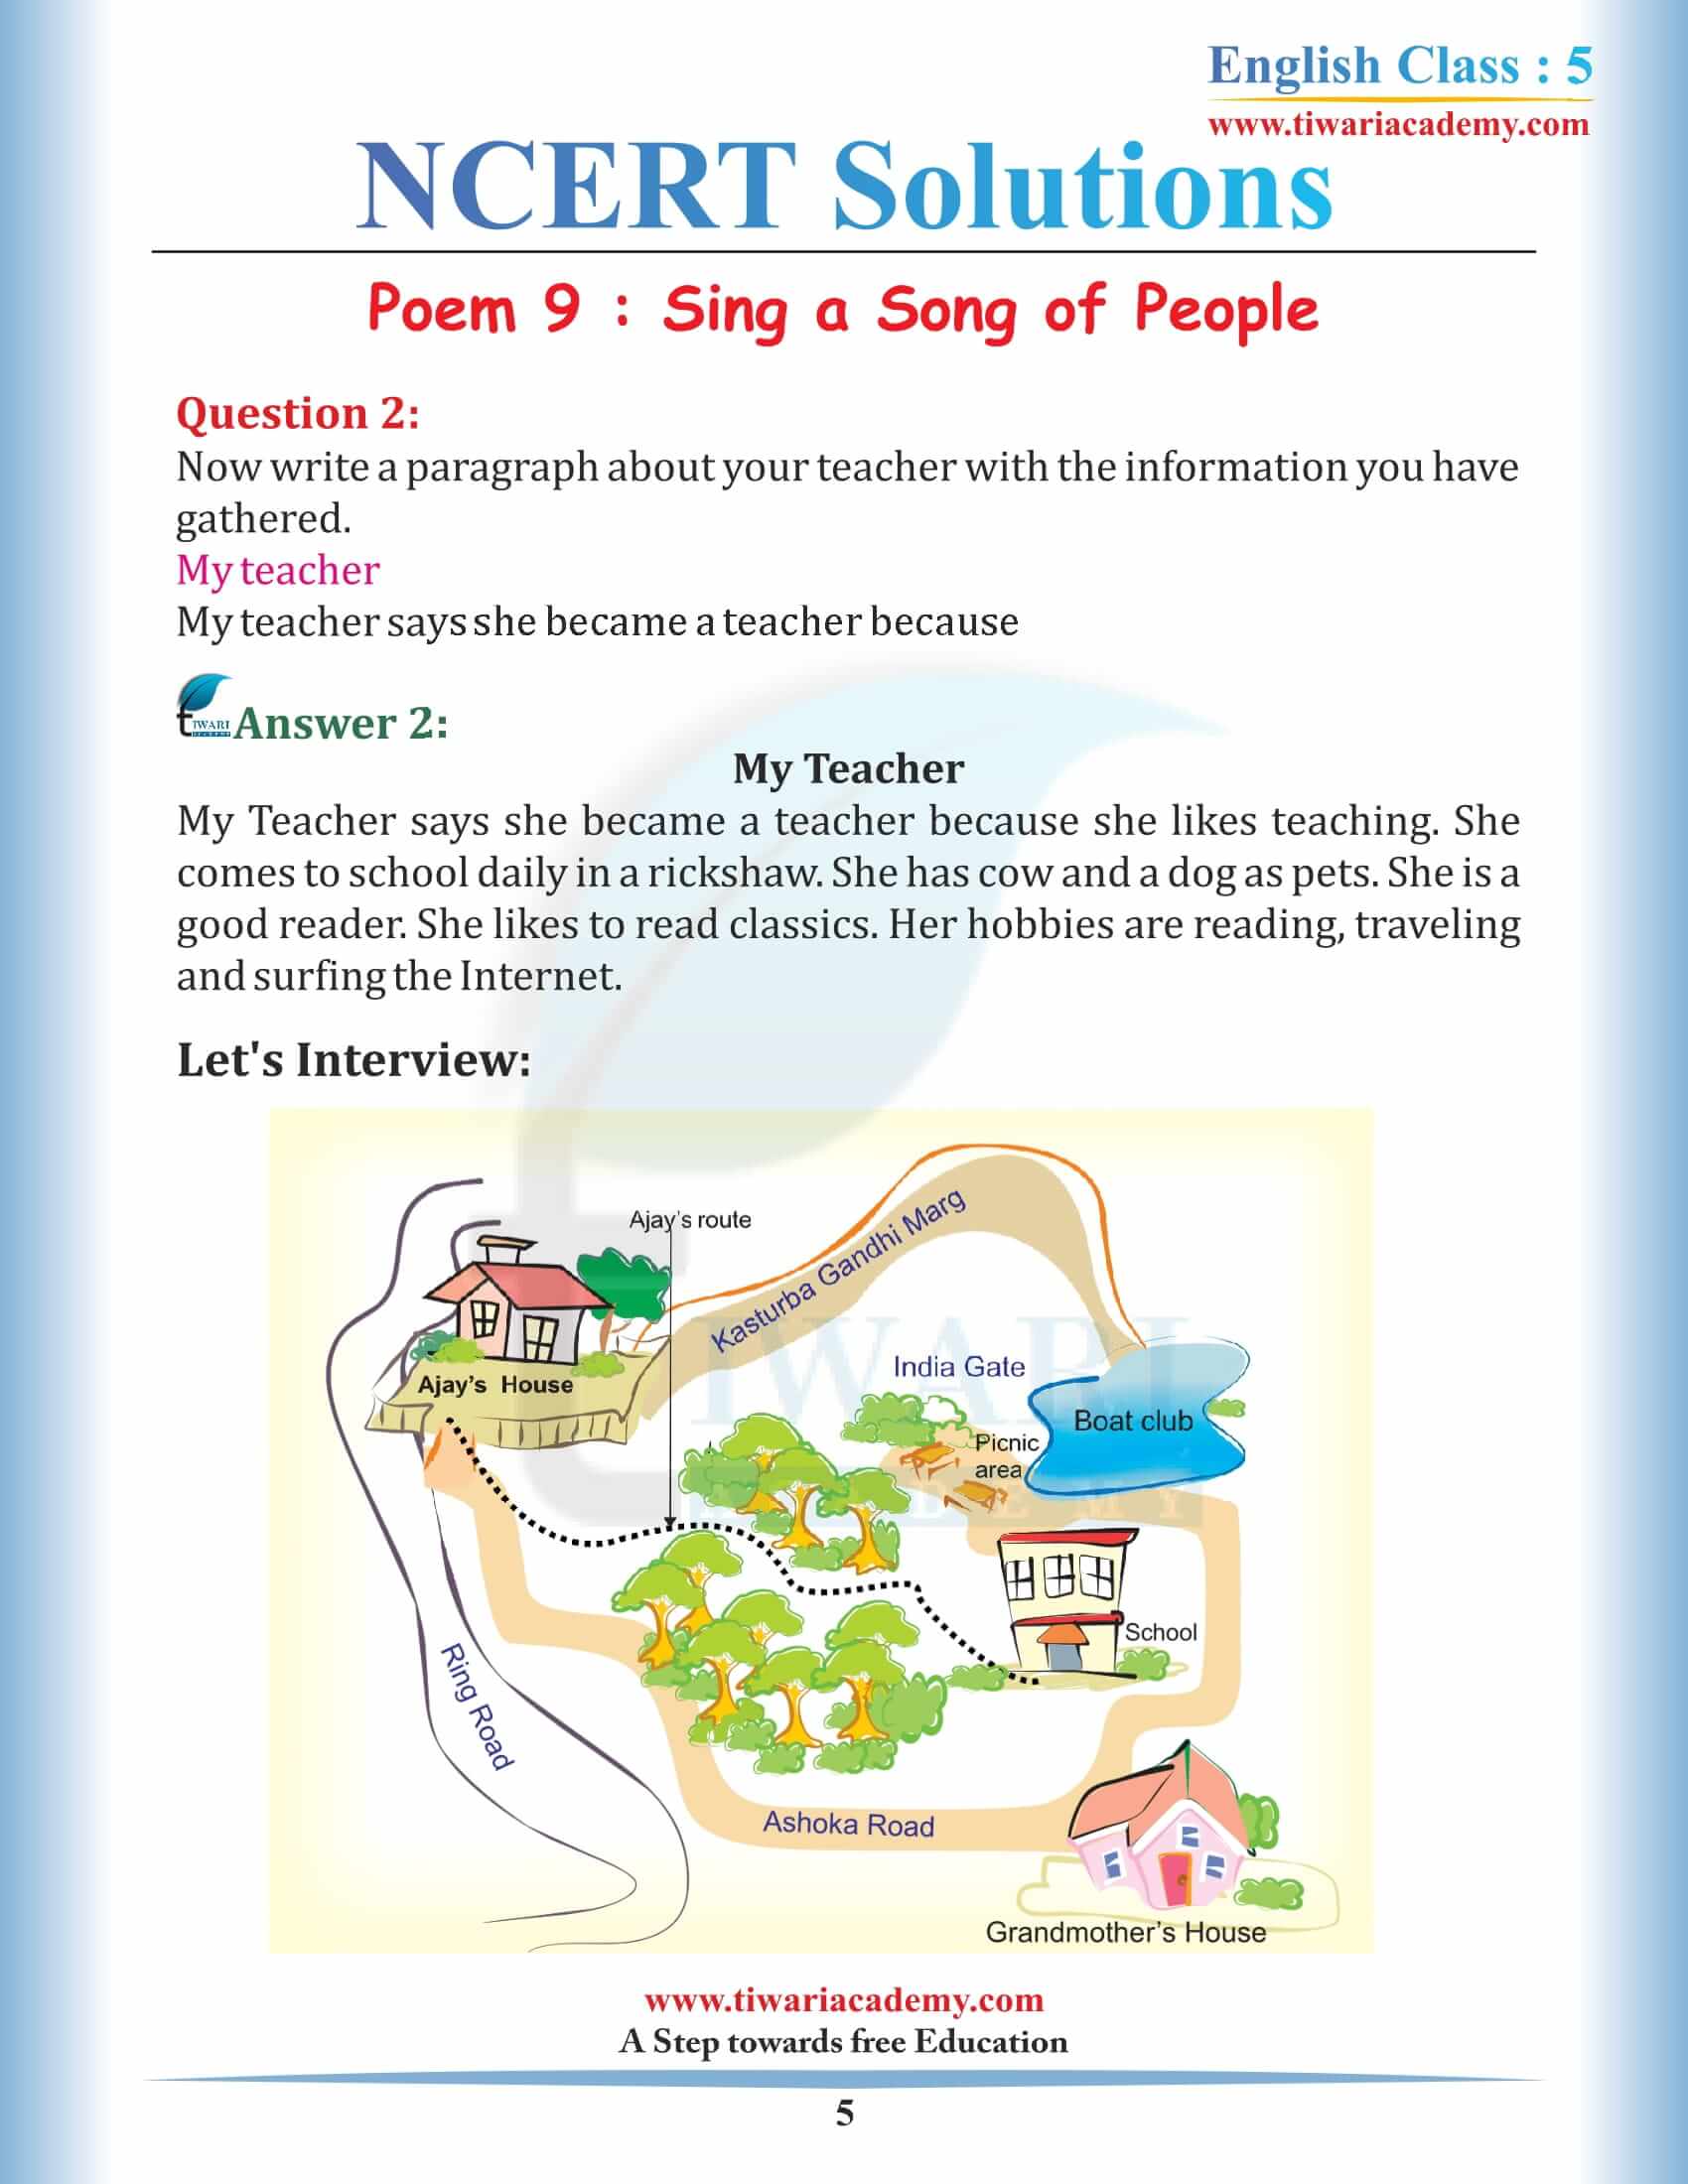 NCERT Solutions for Class 5 English Chapter 9